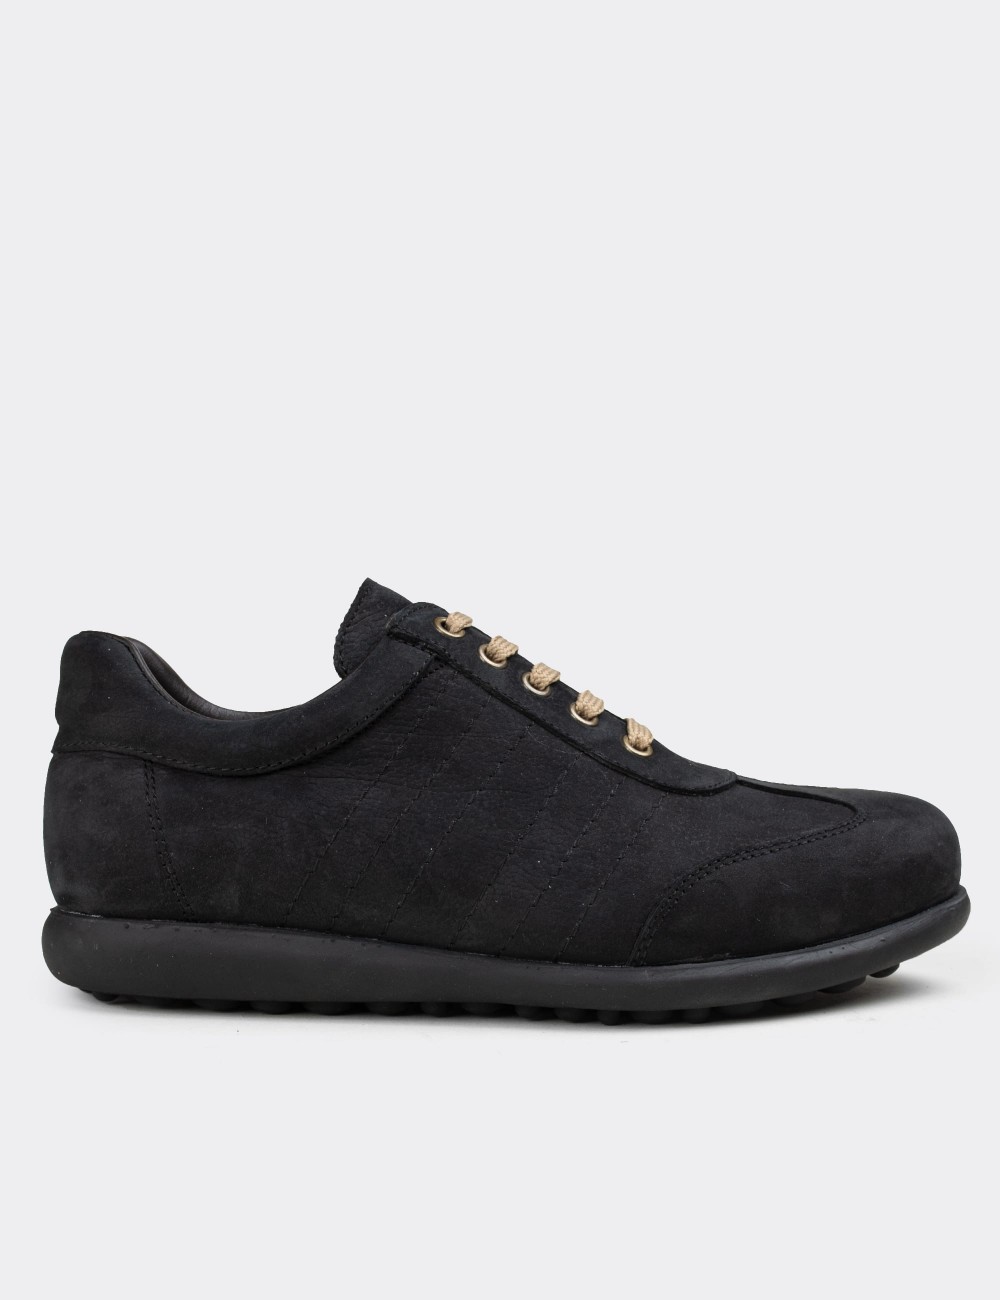 Navy Nubuck Leather Lace-up Shoes - 01826MLCVC02